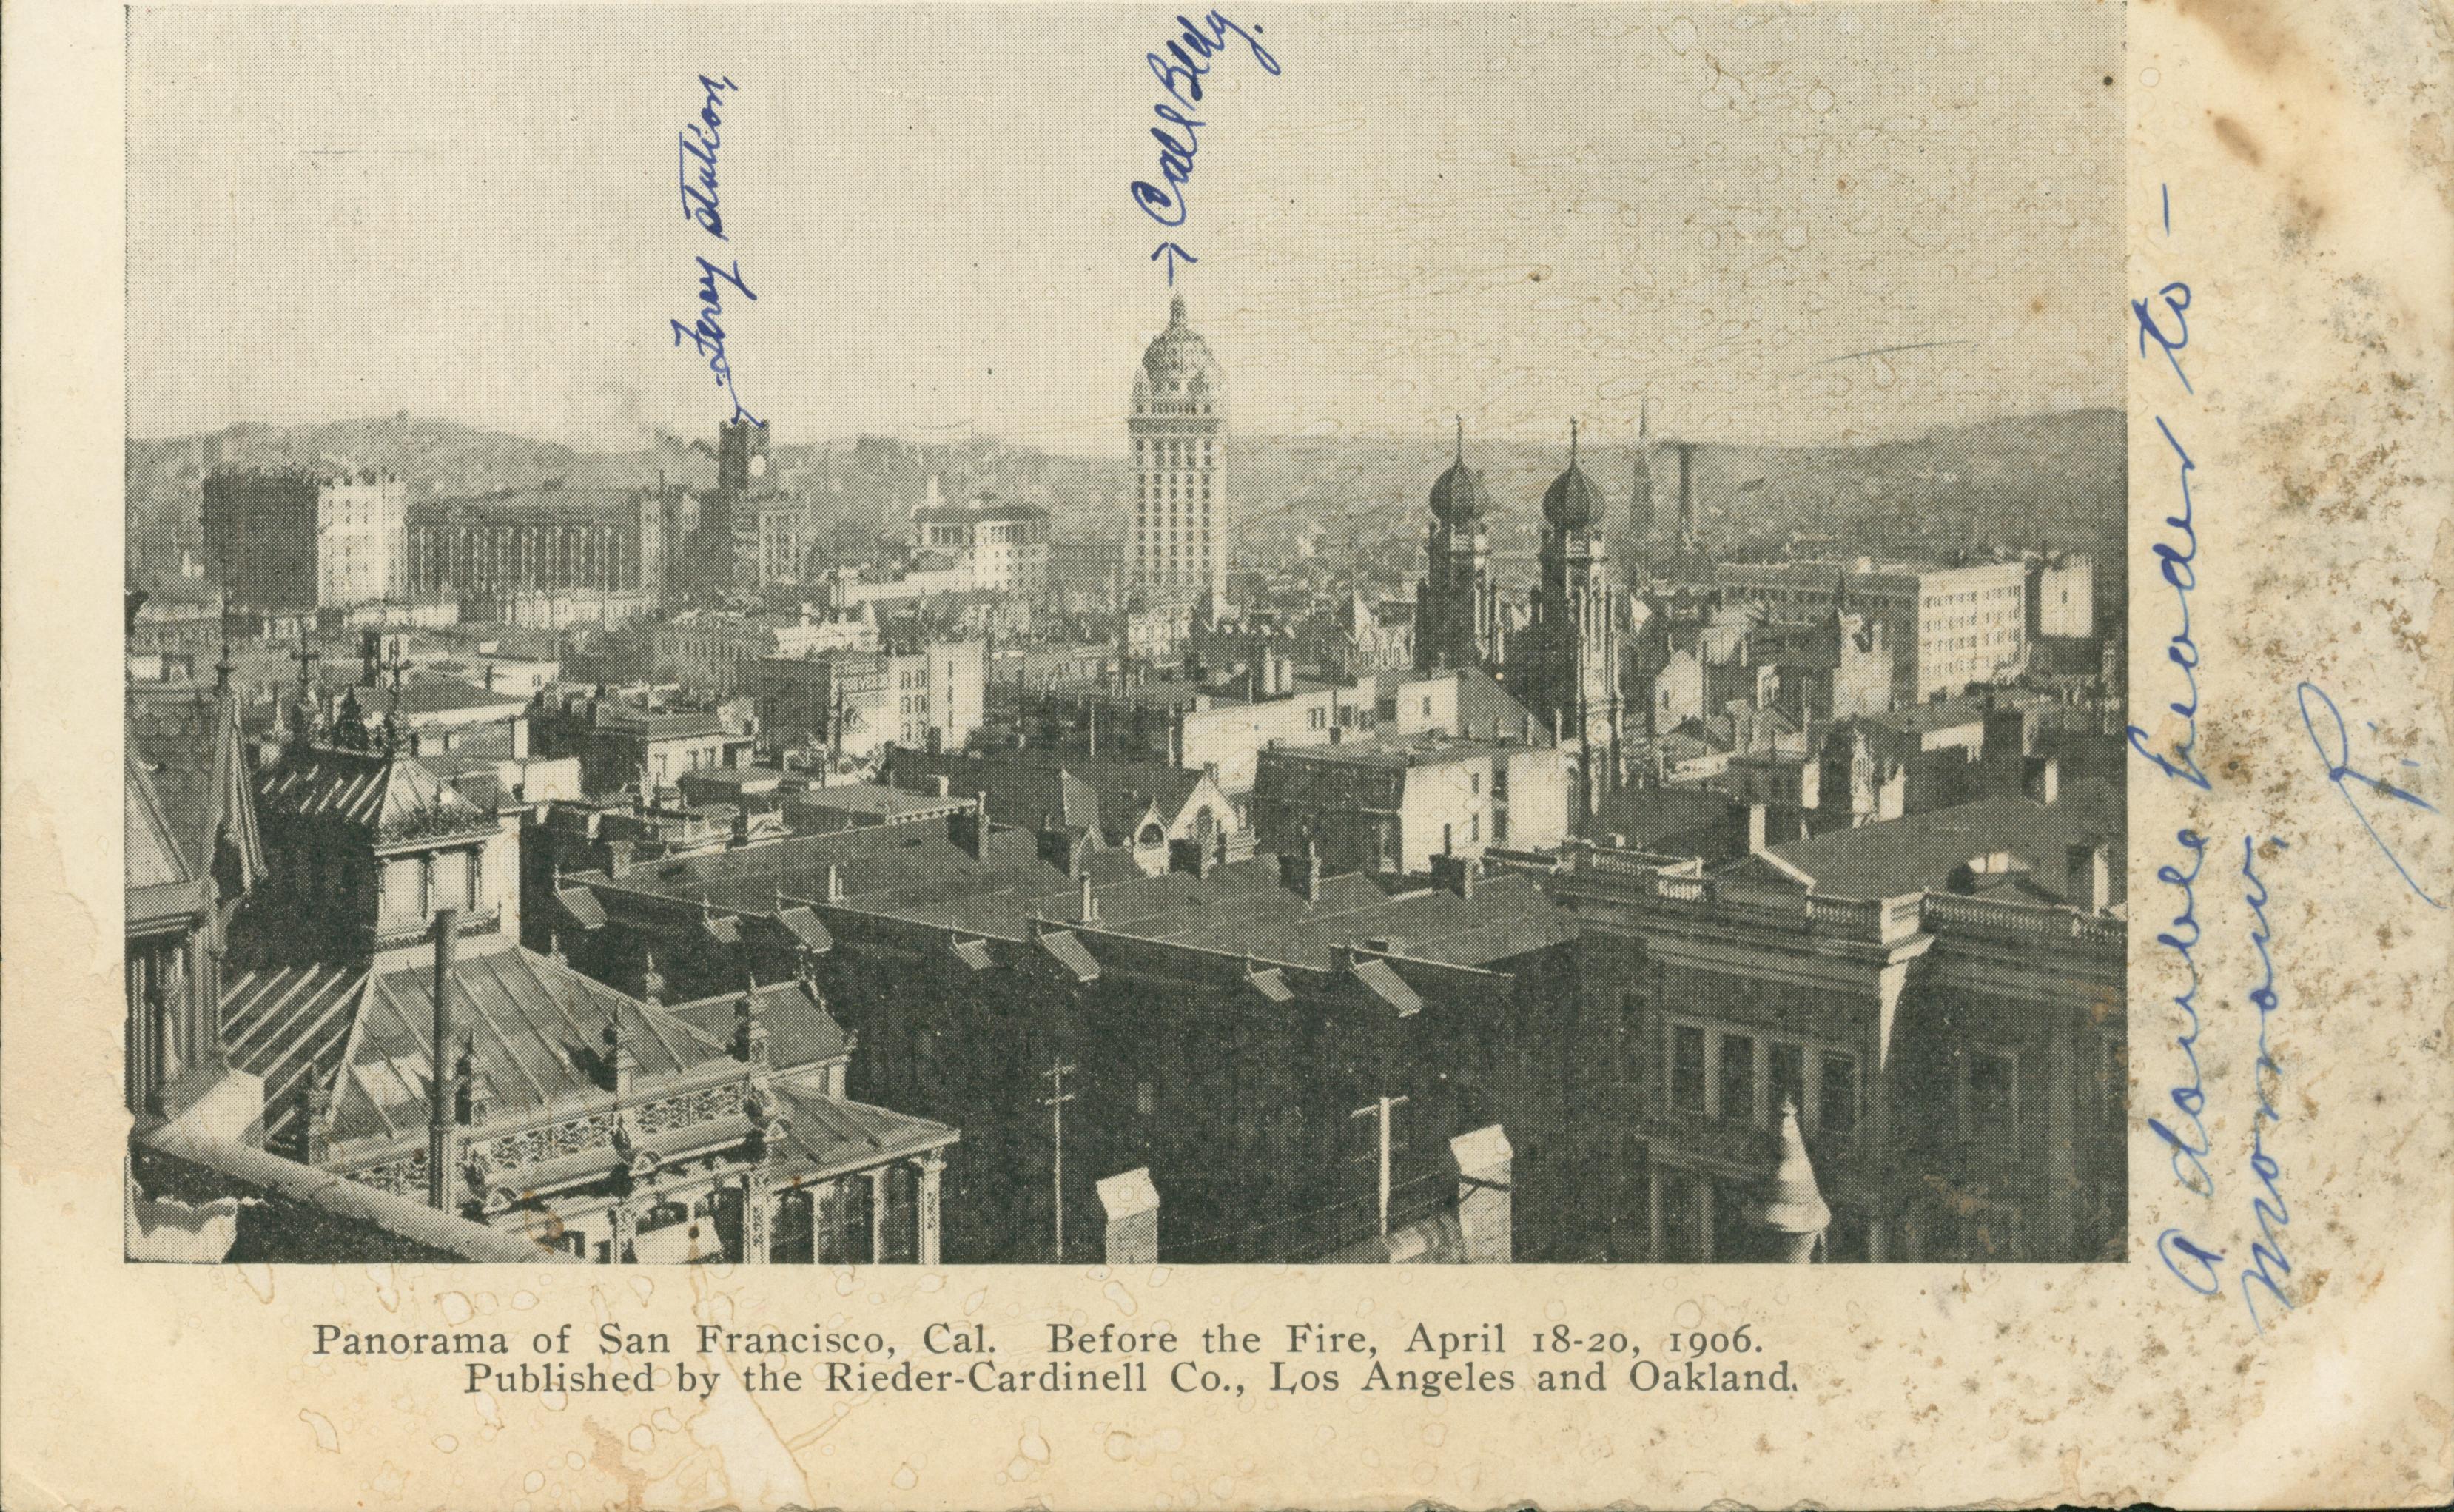 Shows a panoramic view of San Francisco prior to the earthquake